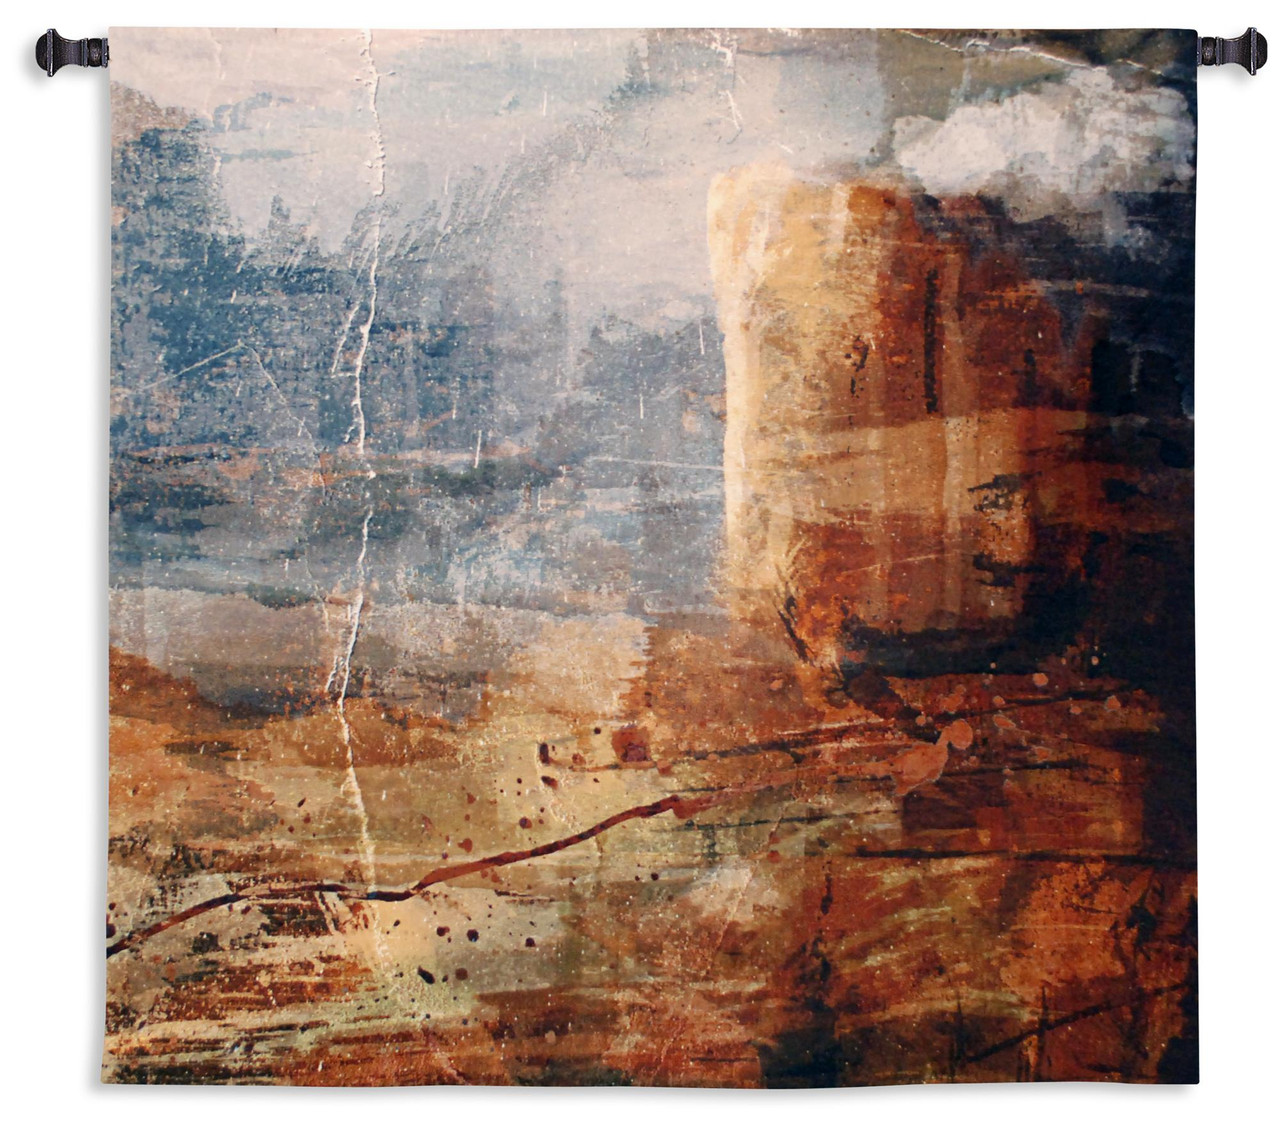 Transition Woven Tapestry Wall Art Hanging Rustic Abstract Jagged Cliff  Landscape 100% Cotton USA Size 35x35